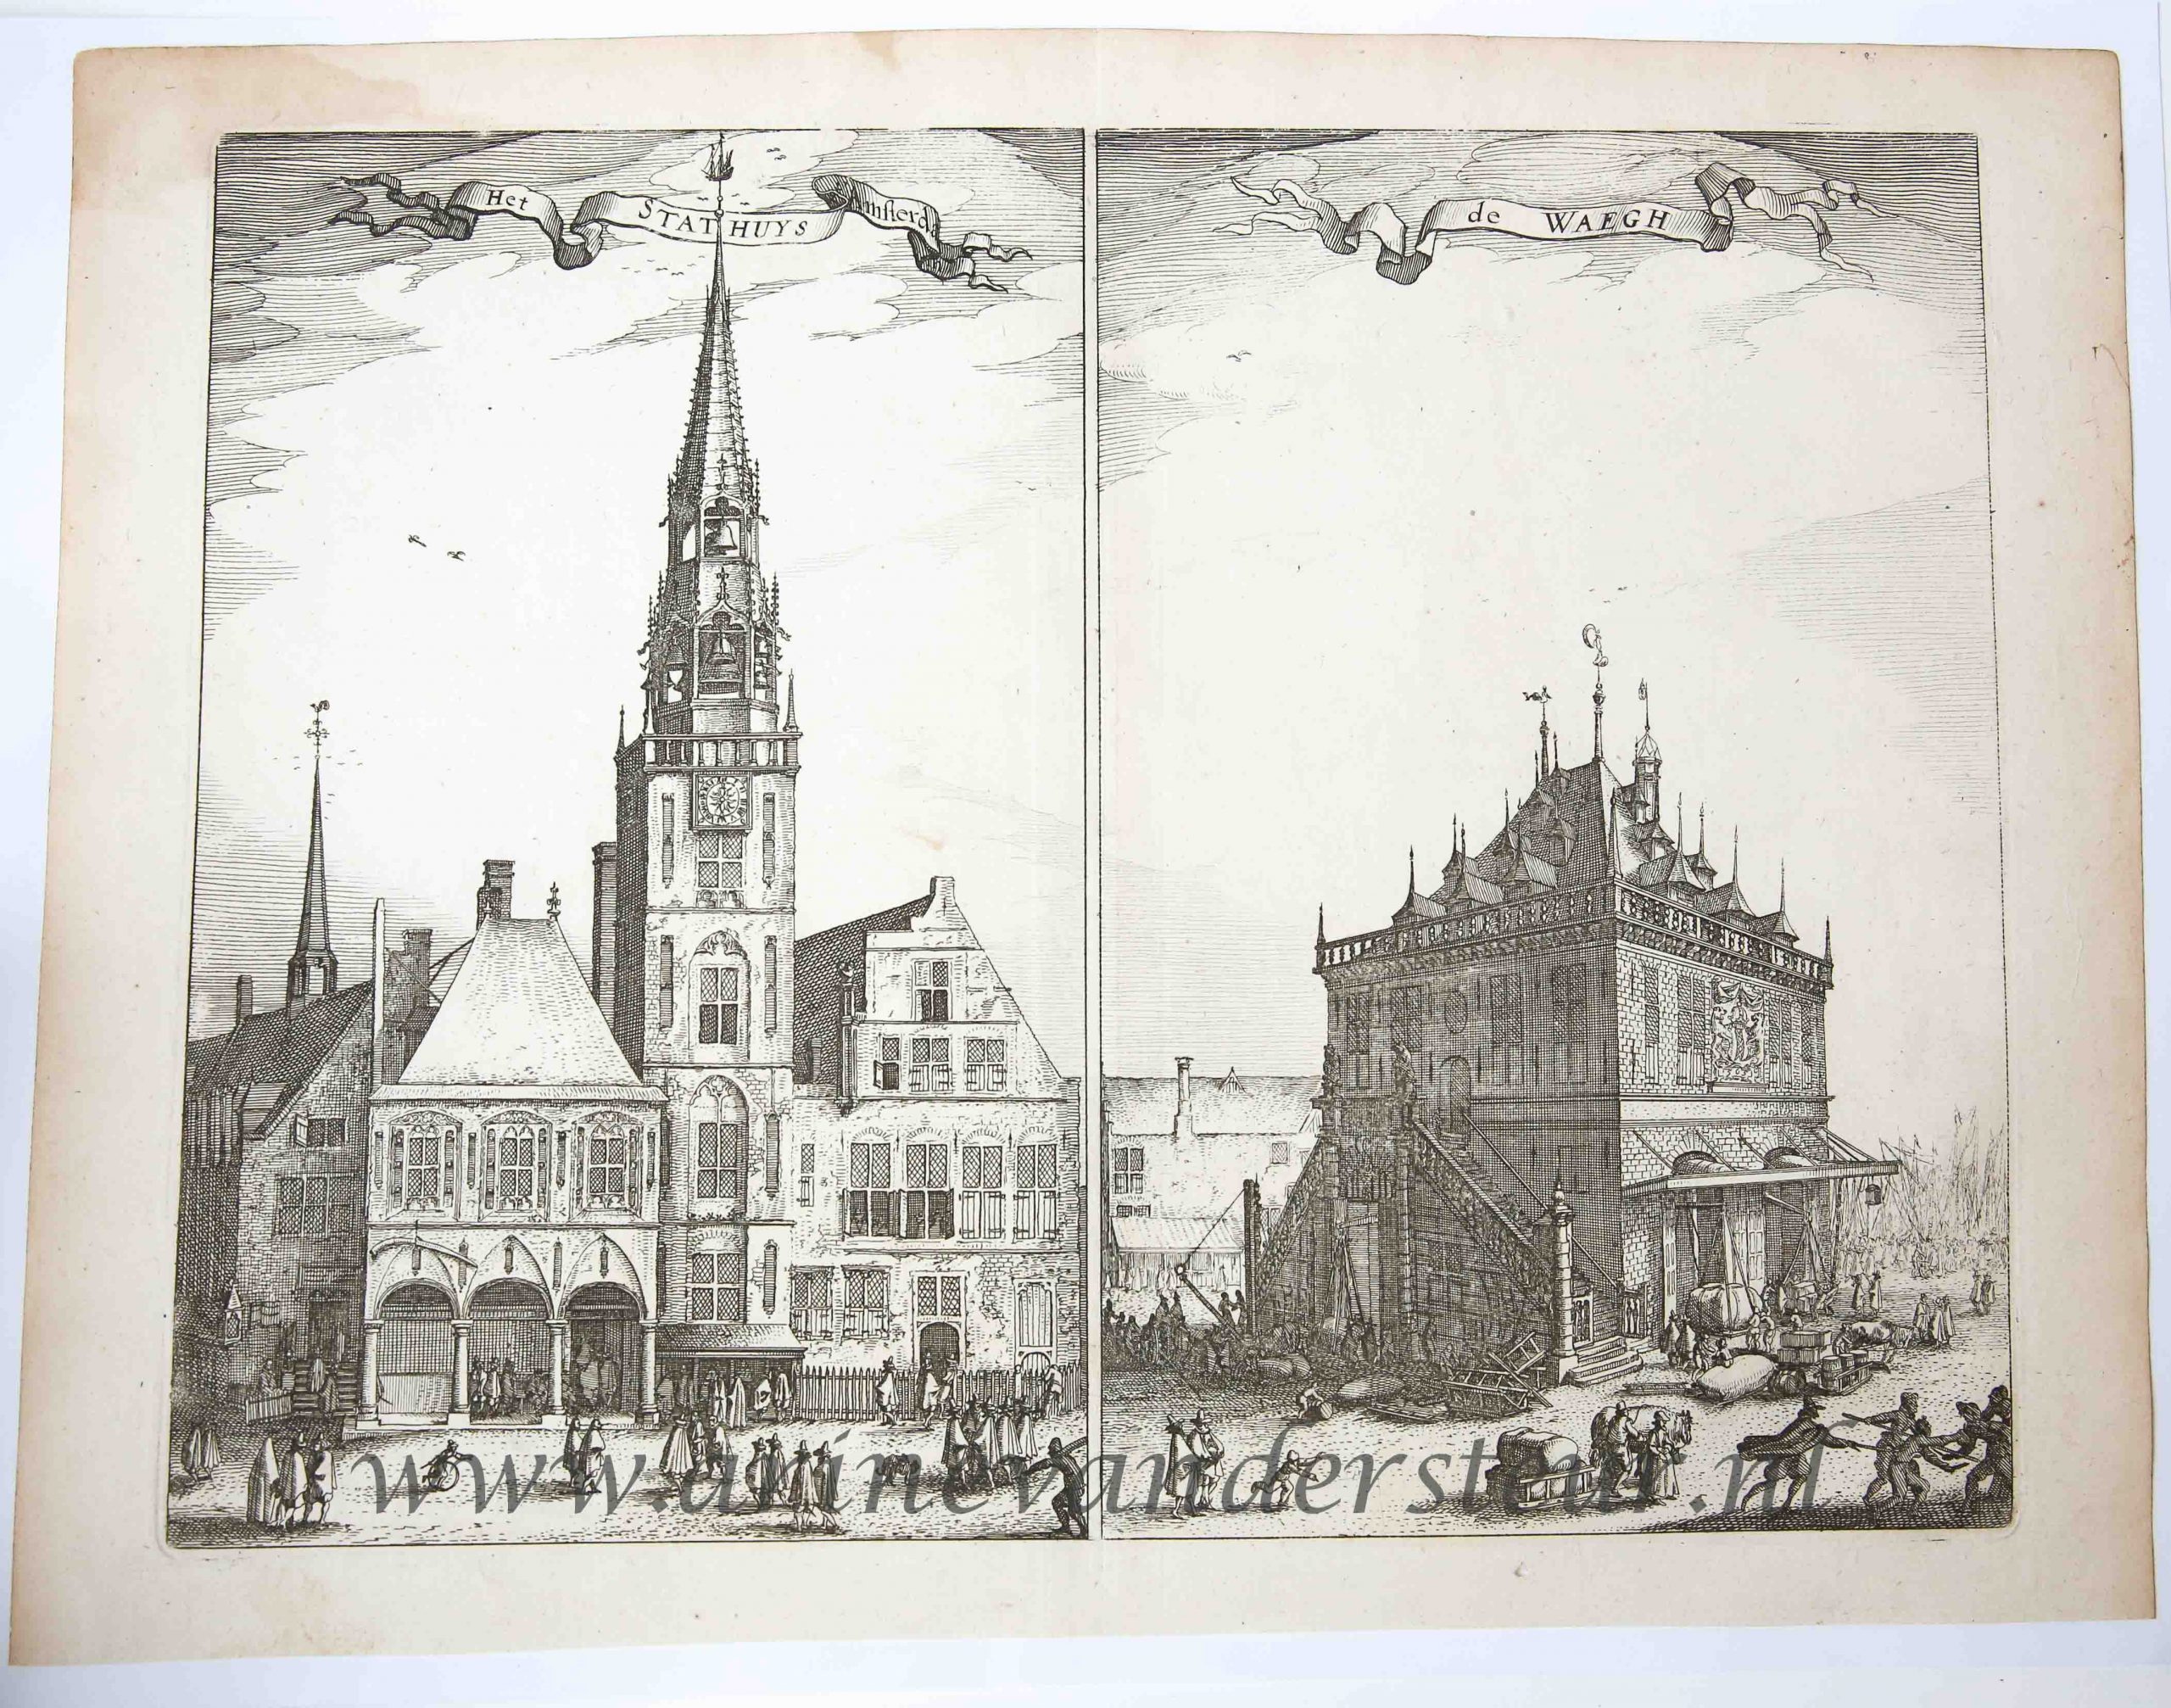 [Antique print, etching/ets] The town hall and the Waag / Stadhuis en de Waag op de dam in Amsterdam, published ca. 1612-1648.